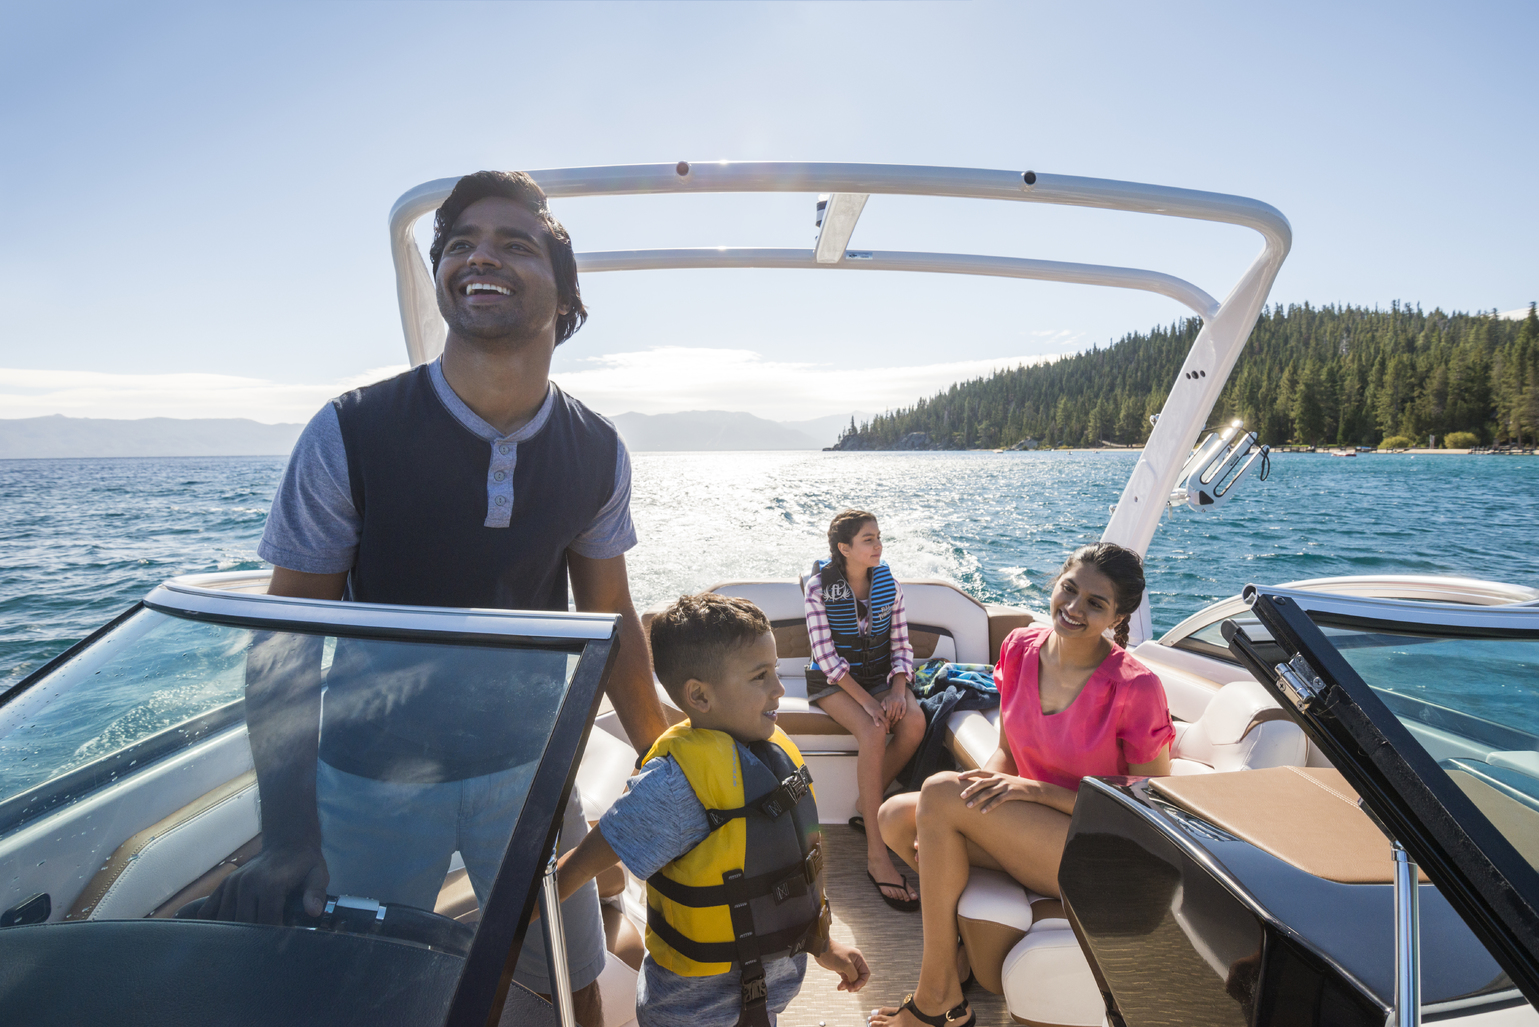 People enjoying various activities in a picturesque view of Lake Tahoe